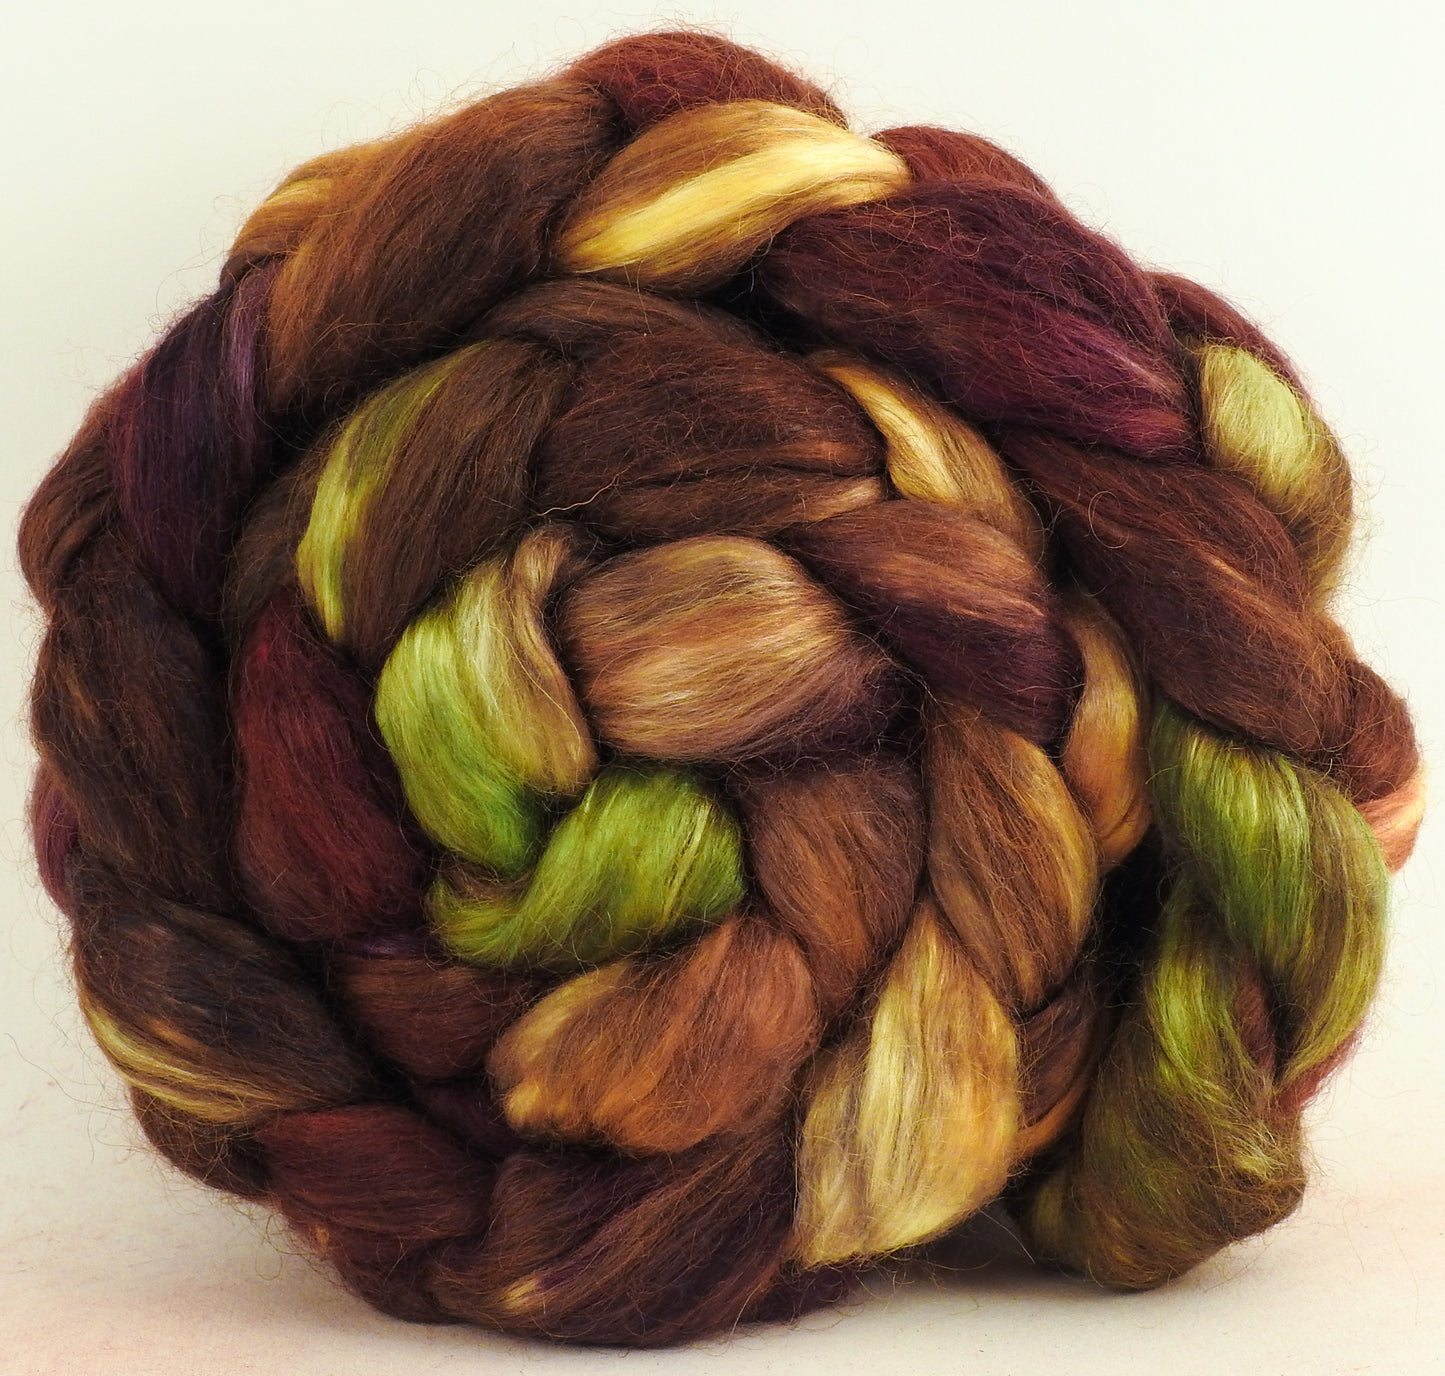 Leaf Pile - Hand-dyed wensleydale/ mulberry silk roving (65/35)